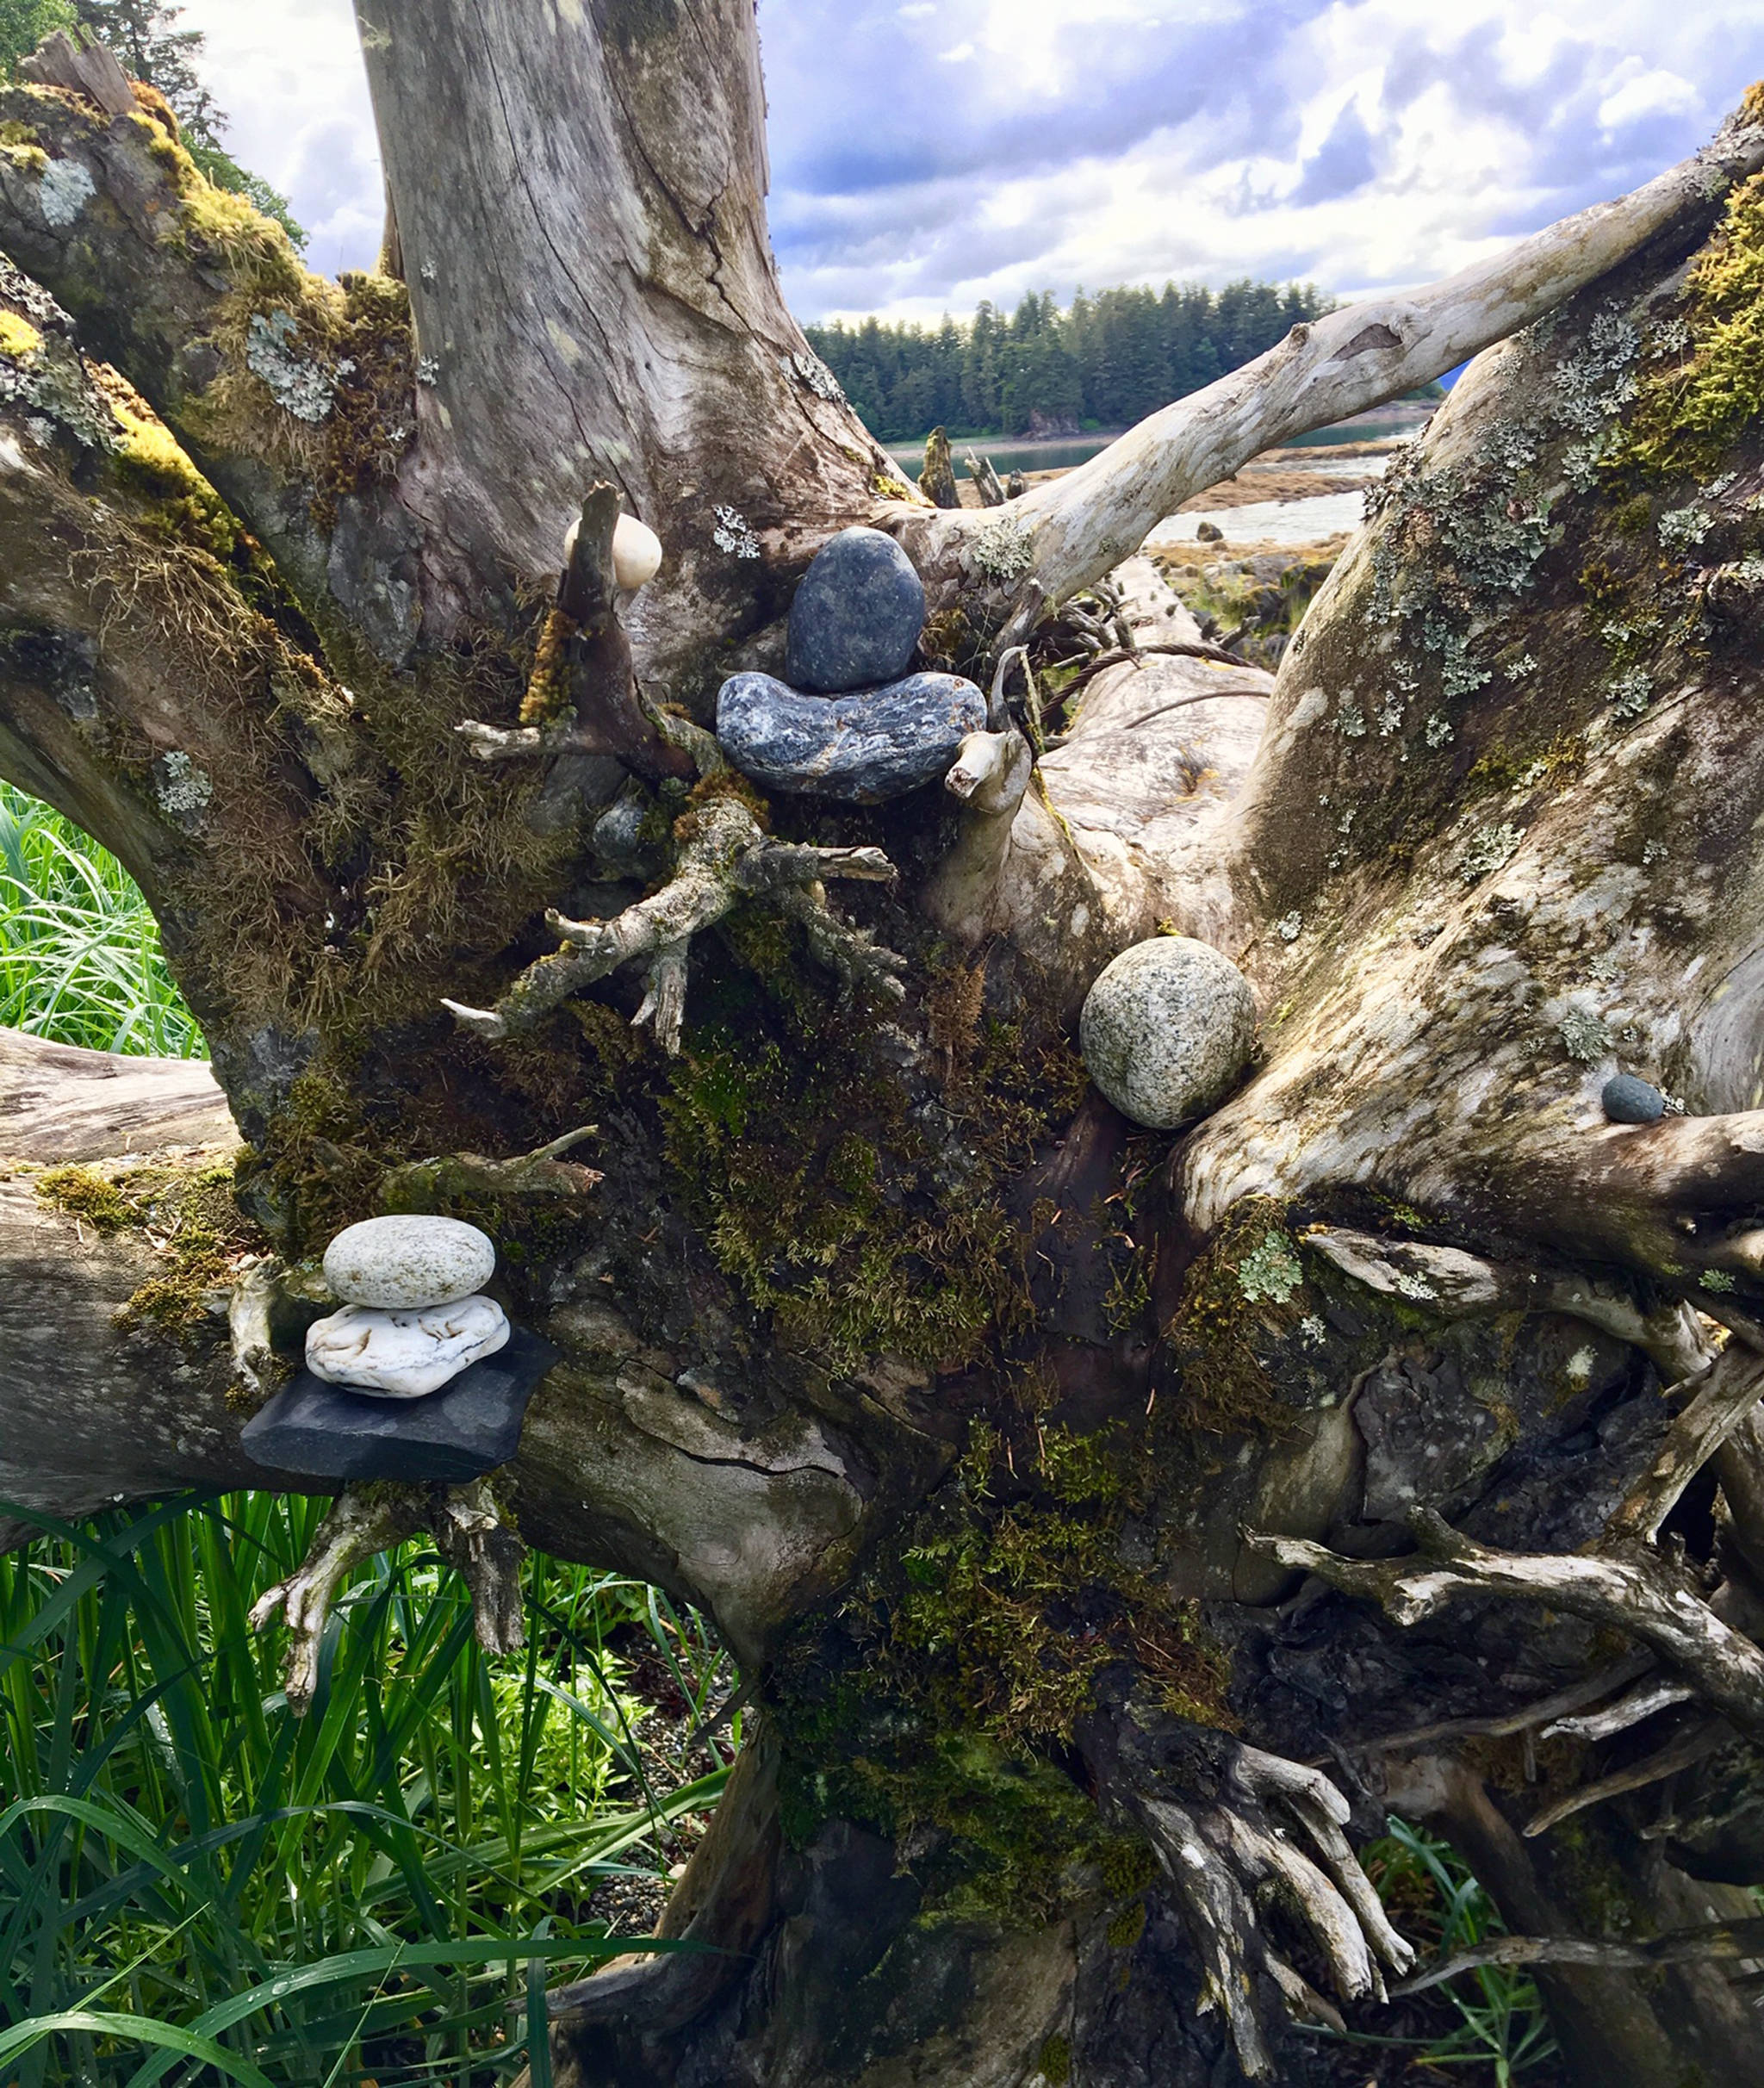 Mini cairns decorate a piece of driftwood at Outer Point on June 23, 2019. (Courtesy photo | Denise Carroll)